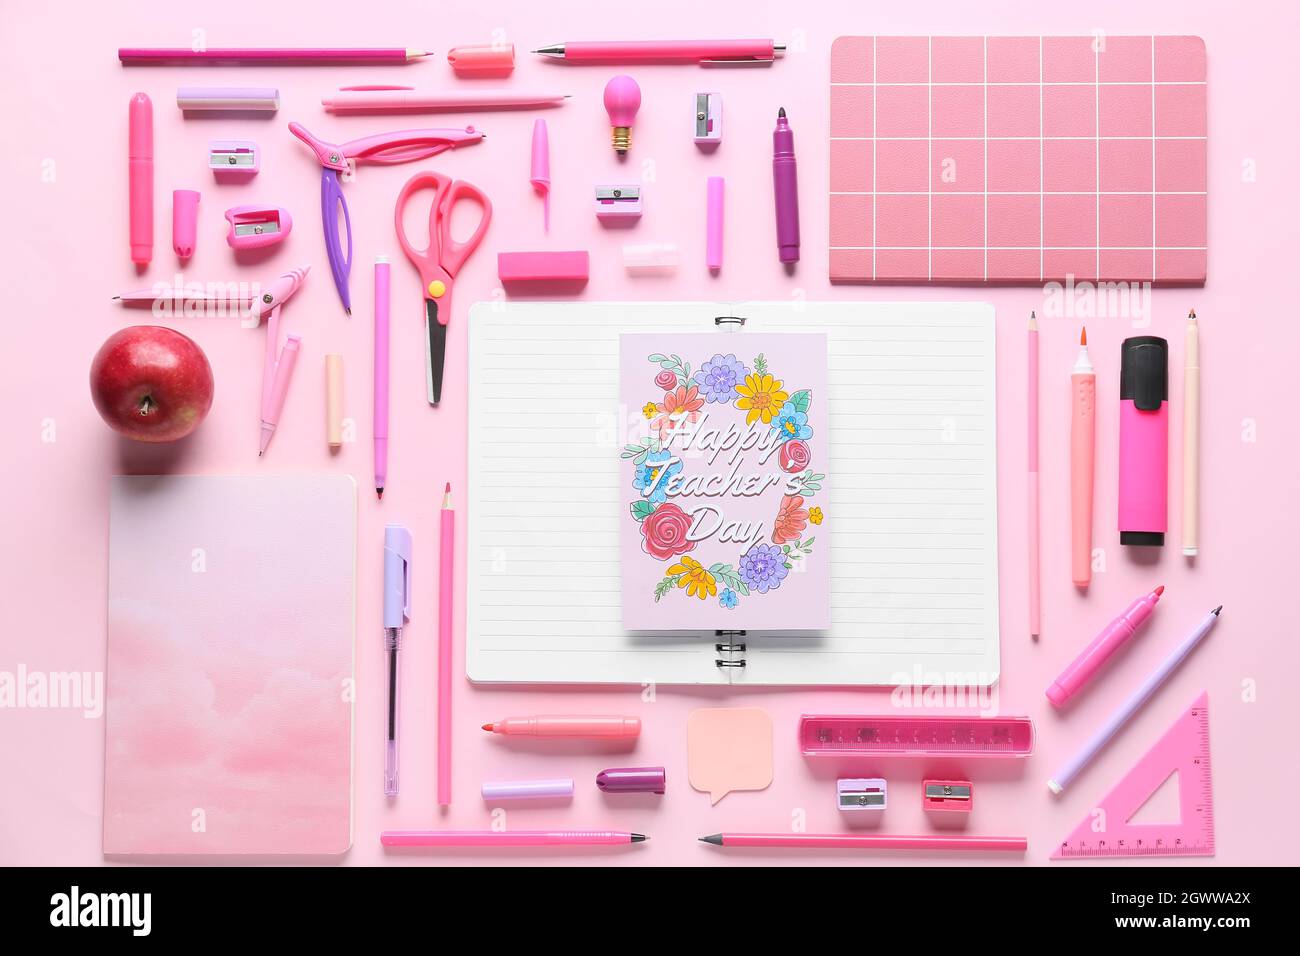 Teacher's Day concept. School supplies and greeting card on pink